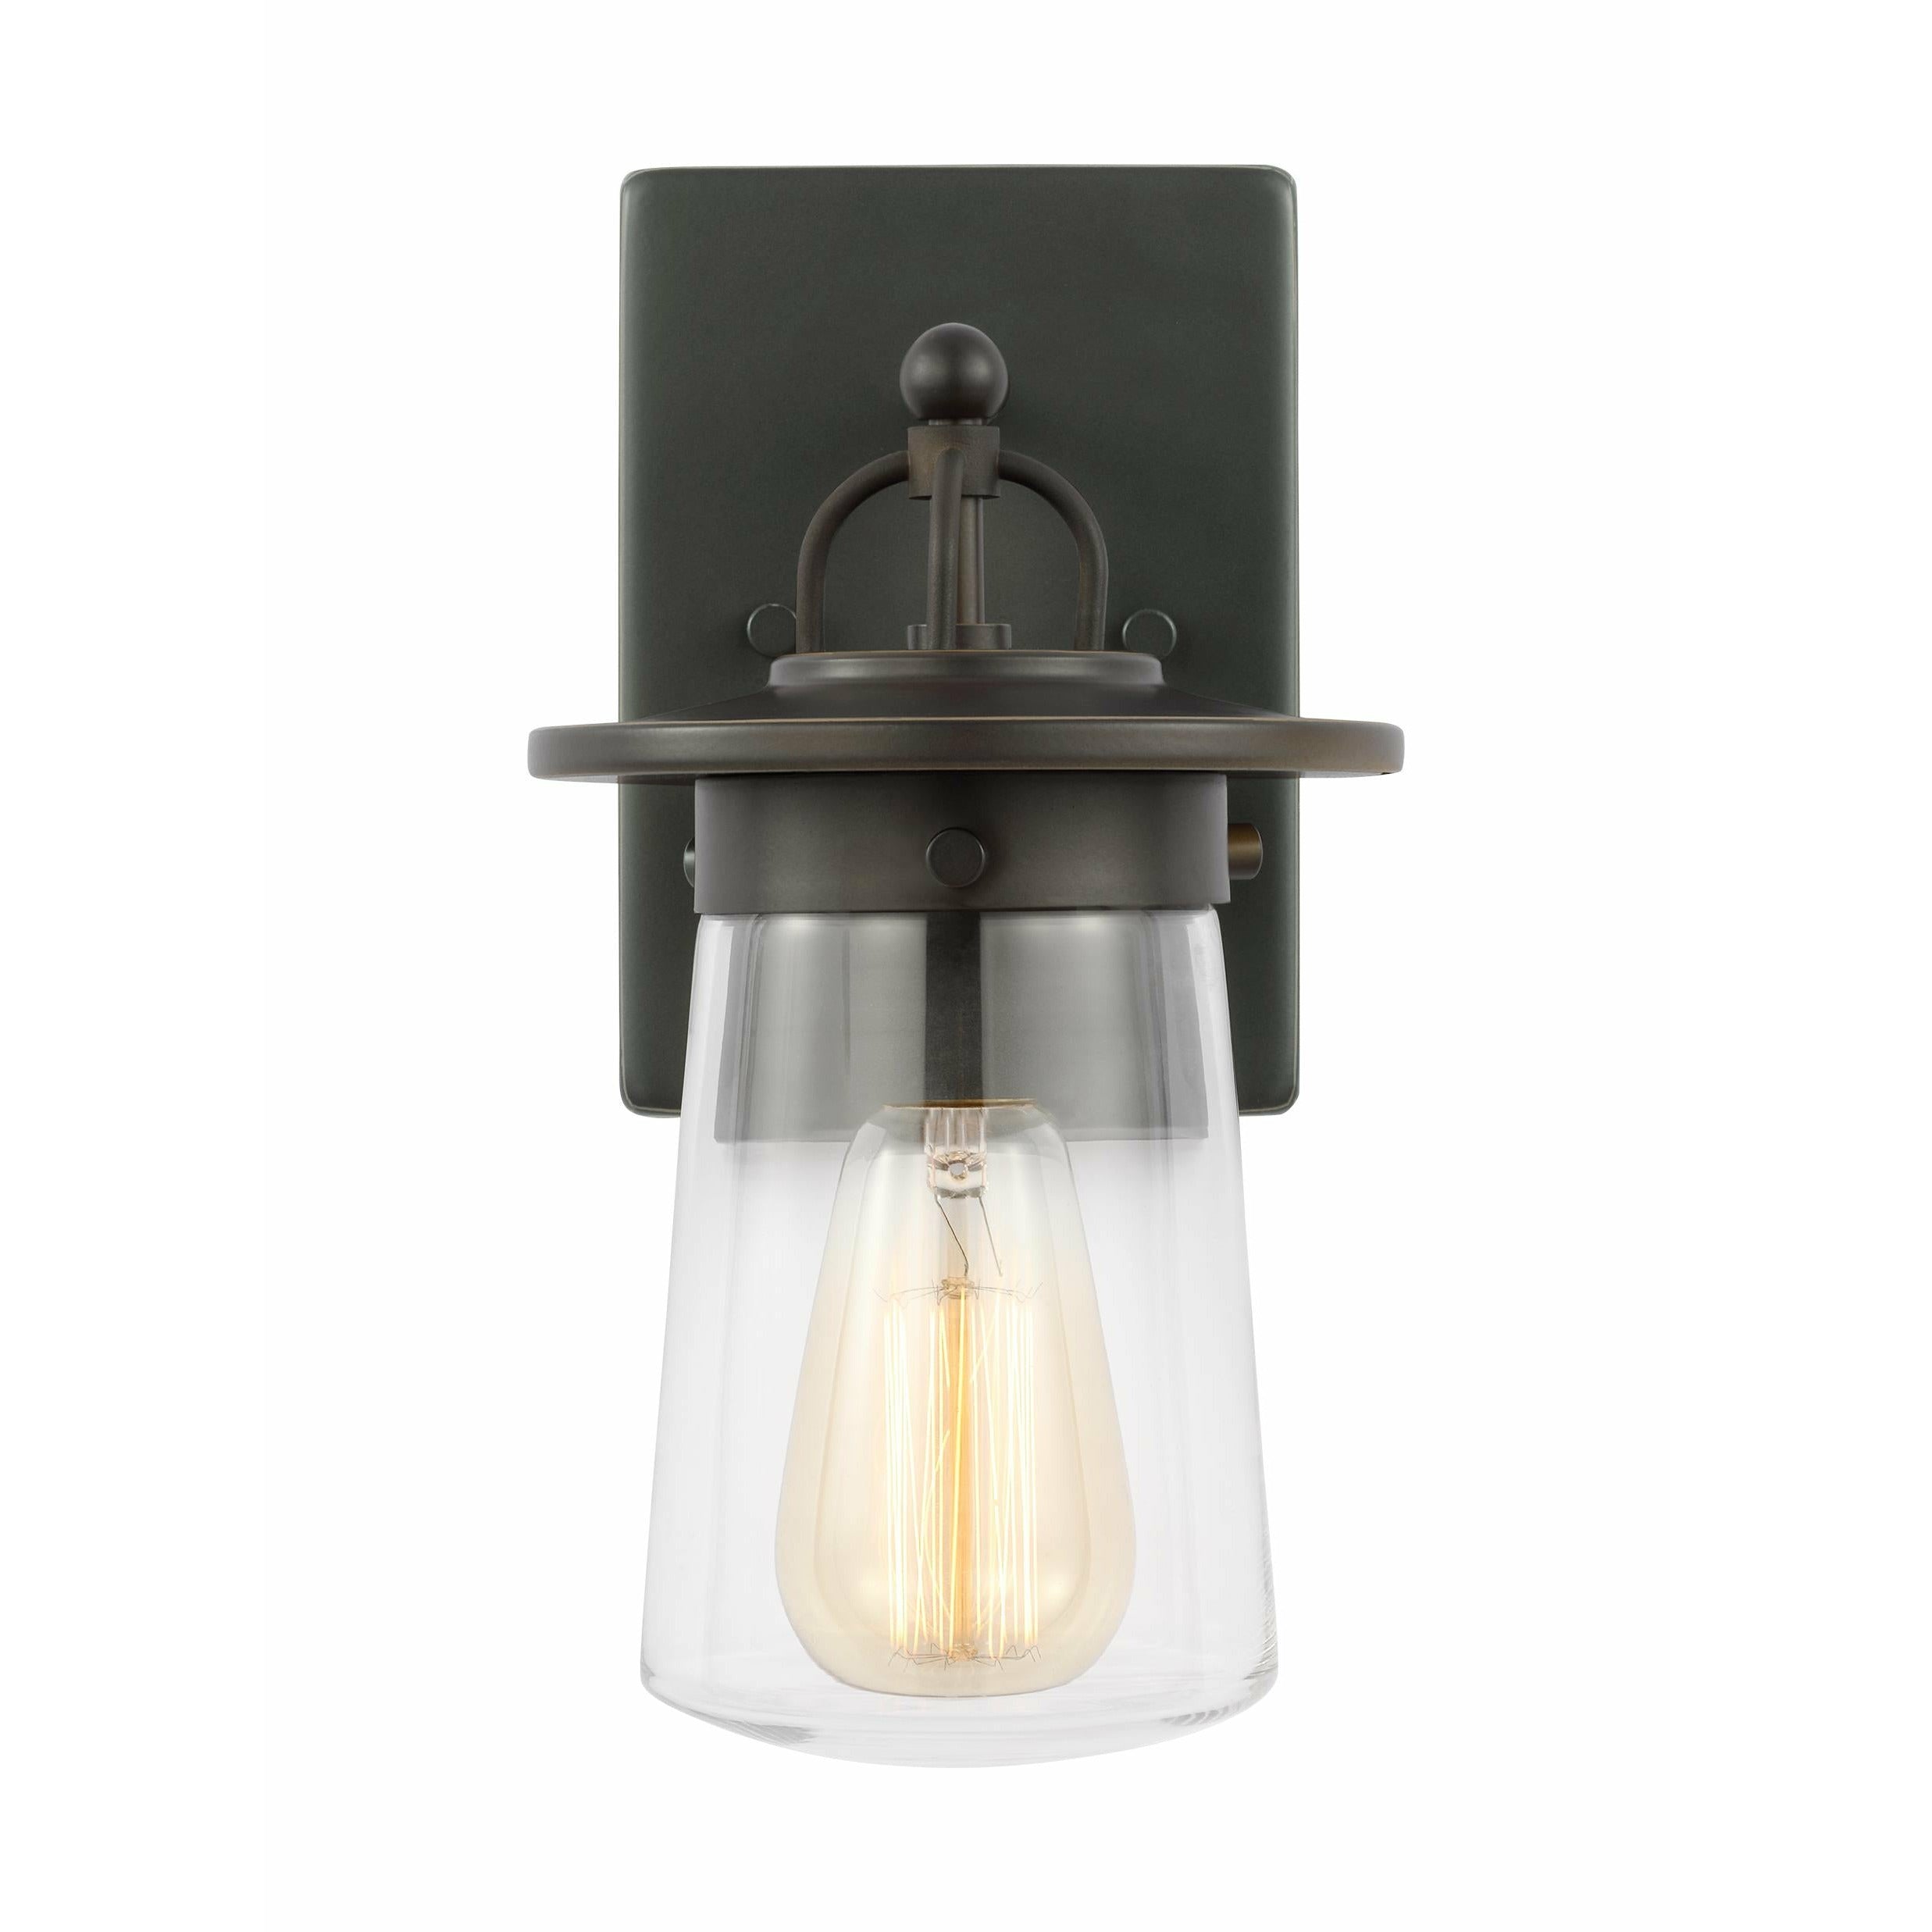 Tybee Small 1-Light Outdoor Wall Light (with Bulb)